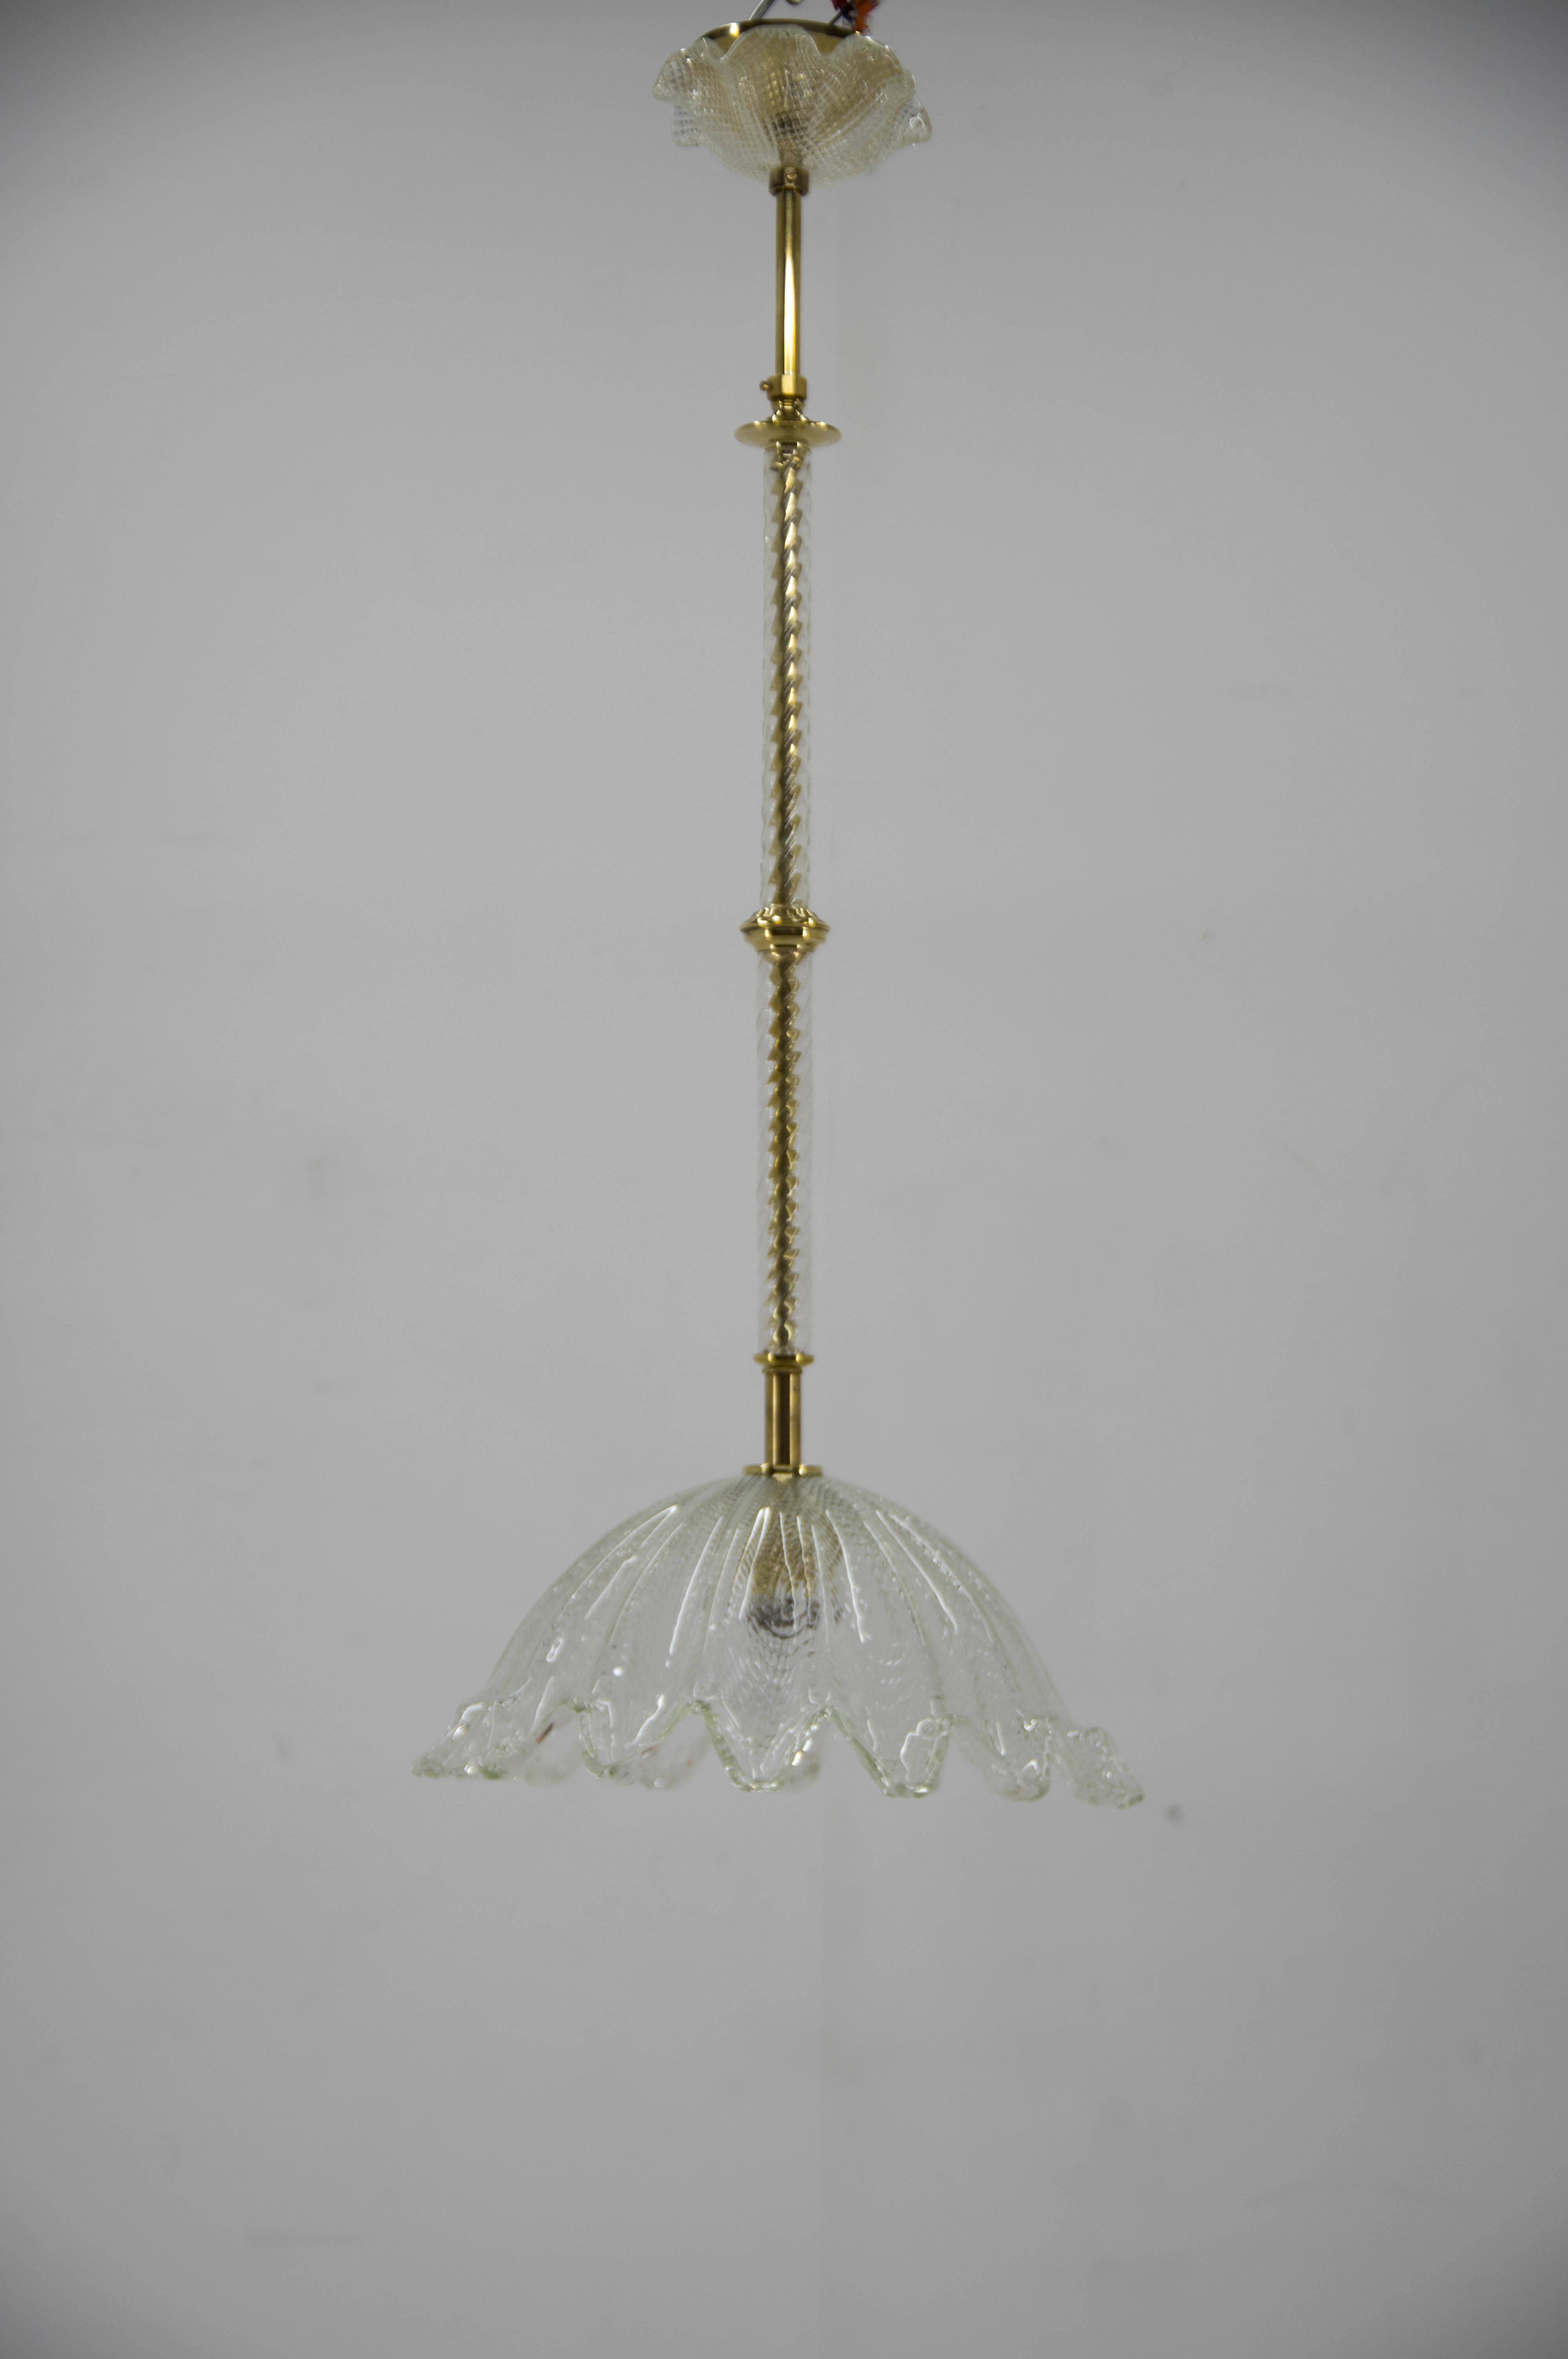 Hand made glass and brass pendant made in Italy in 1970s.
Rewired: 1x100W, E25-E27 bulb
US wiring compatible